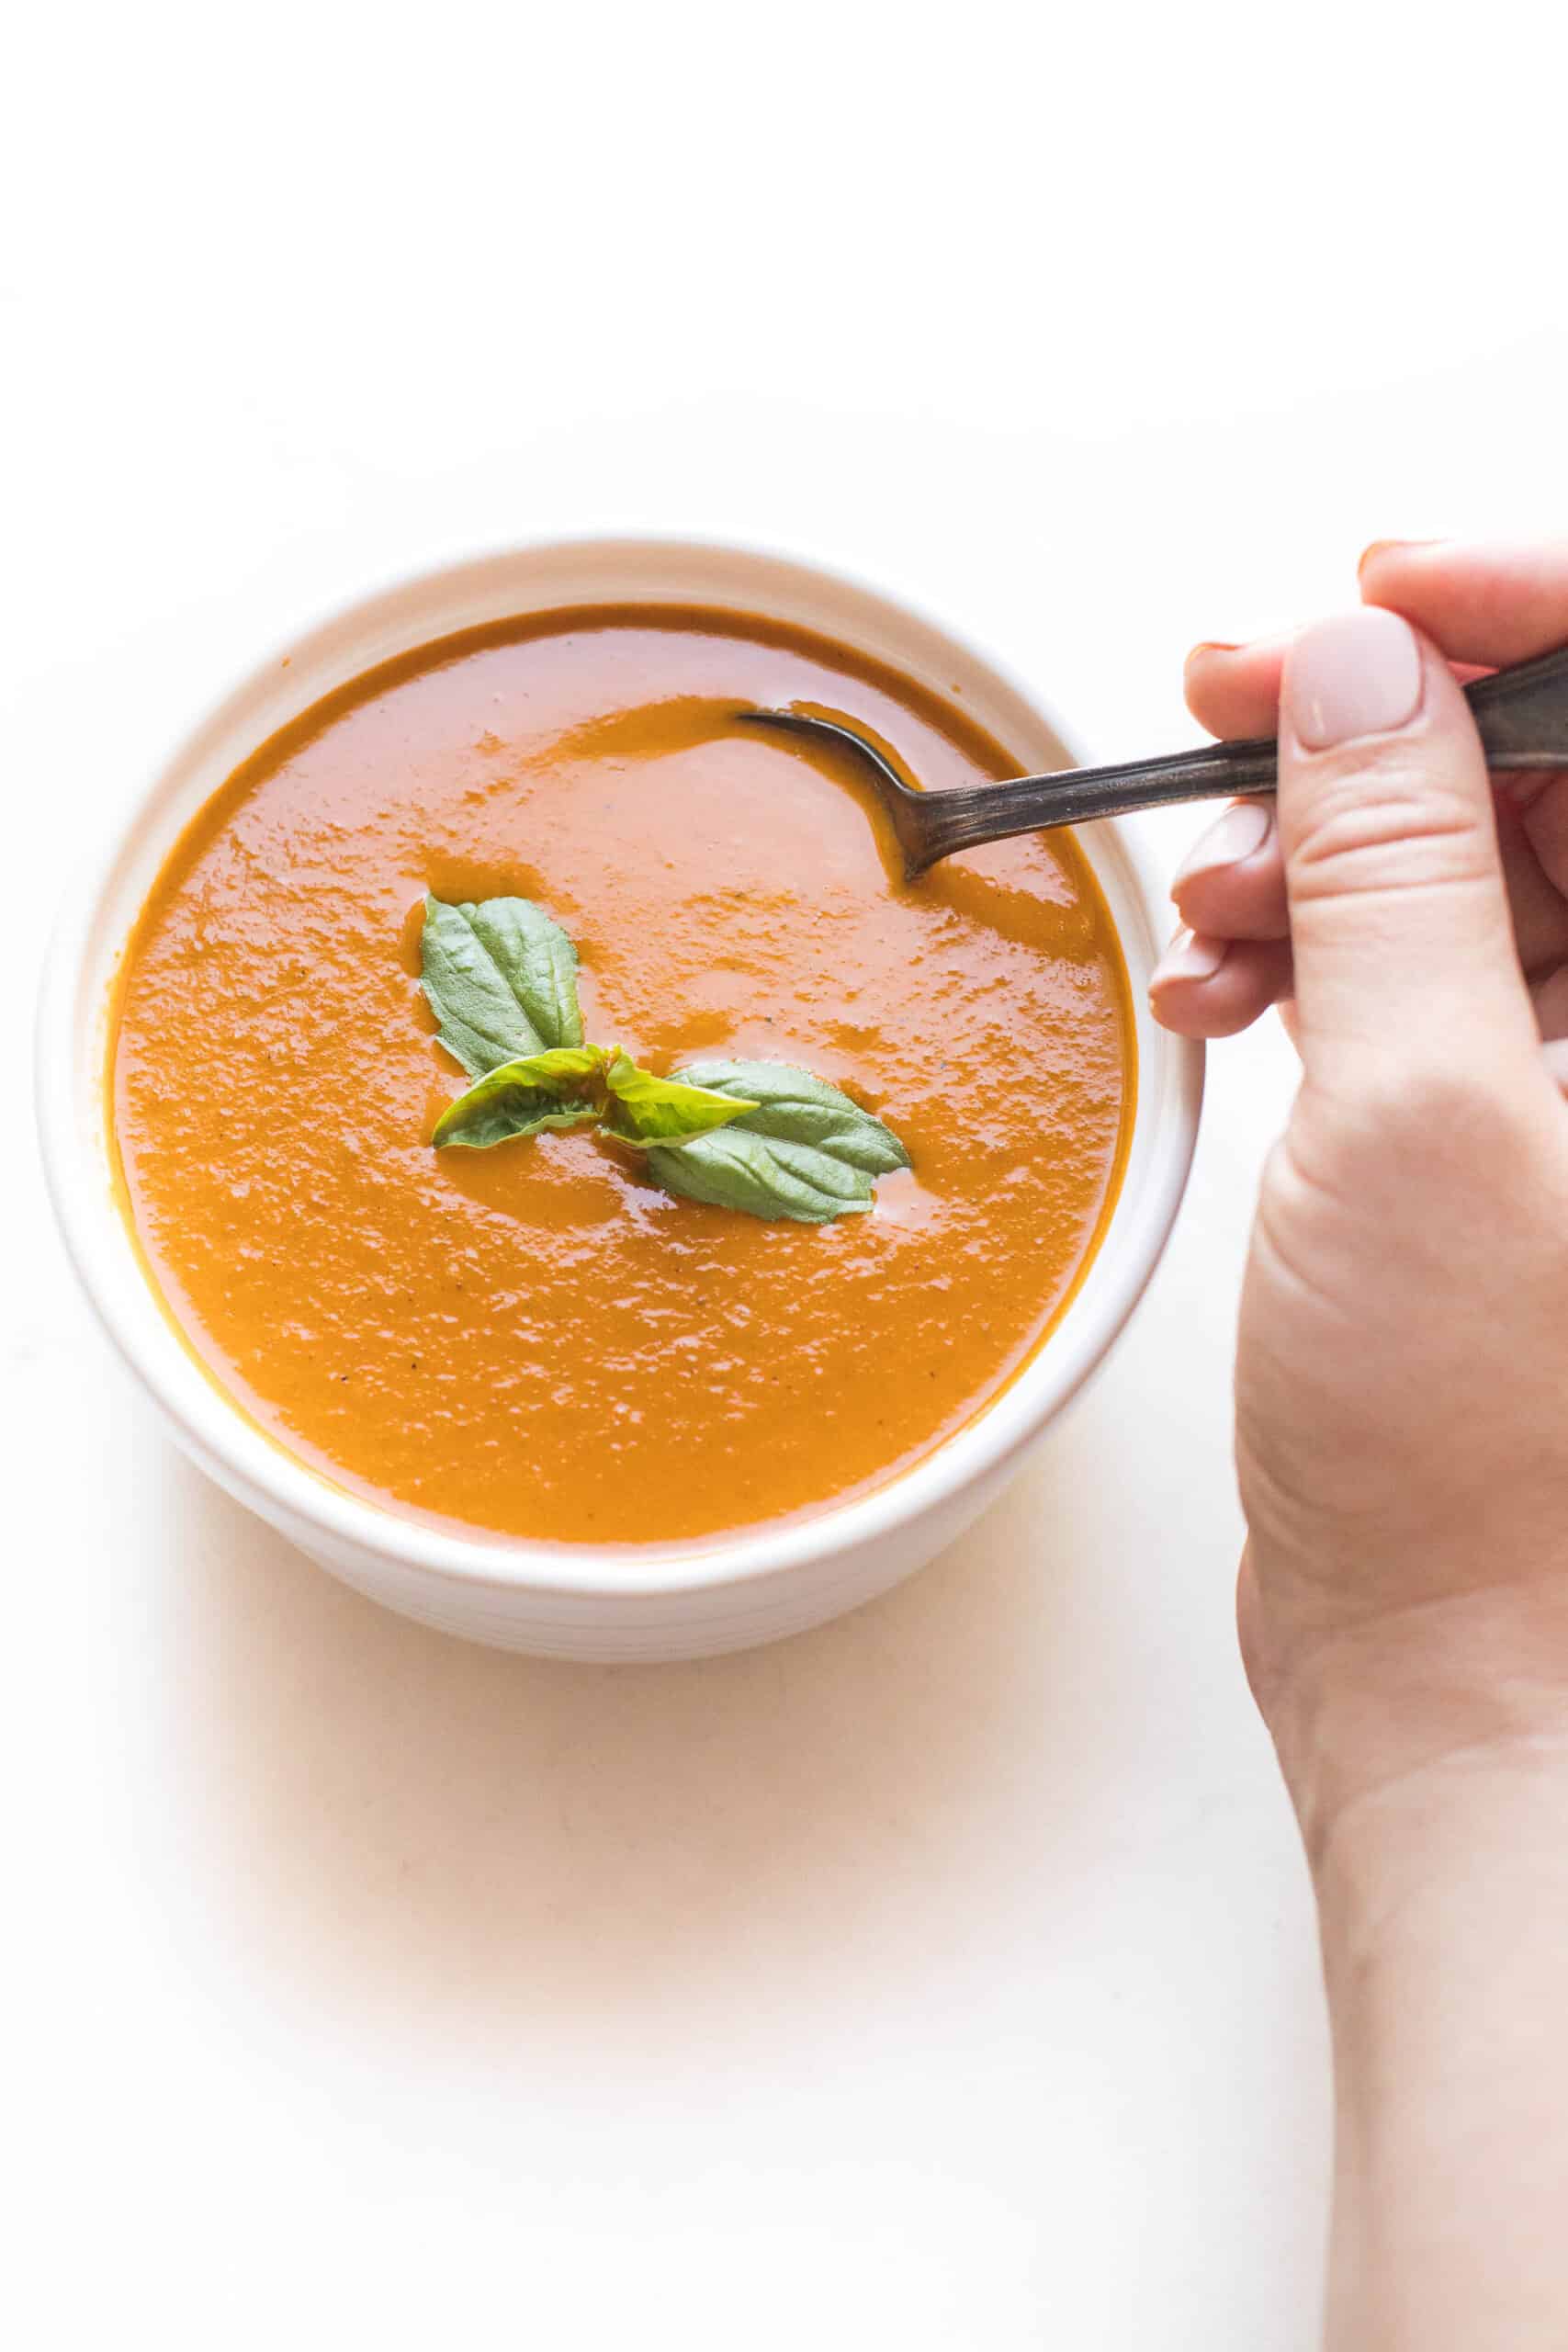 hand spooning roasted tomato basil soup in a white bowl on a white background